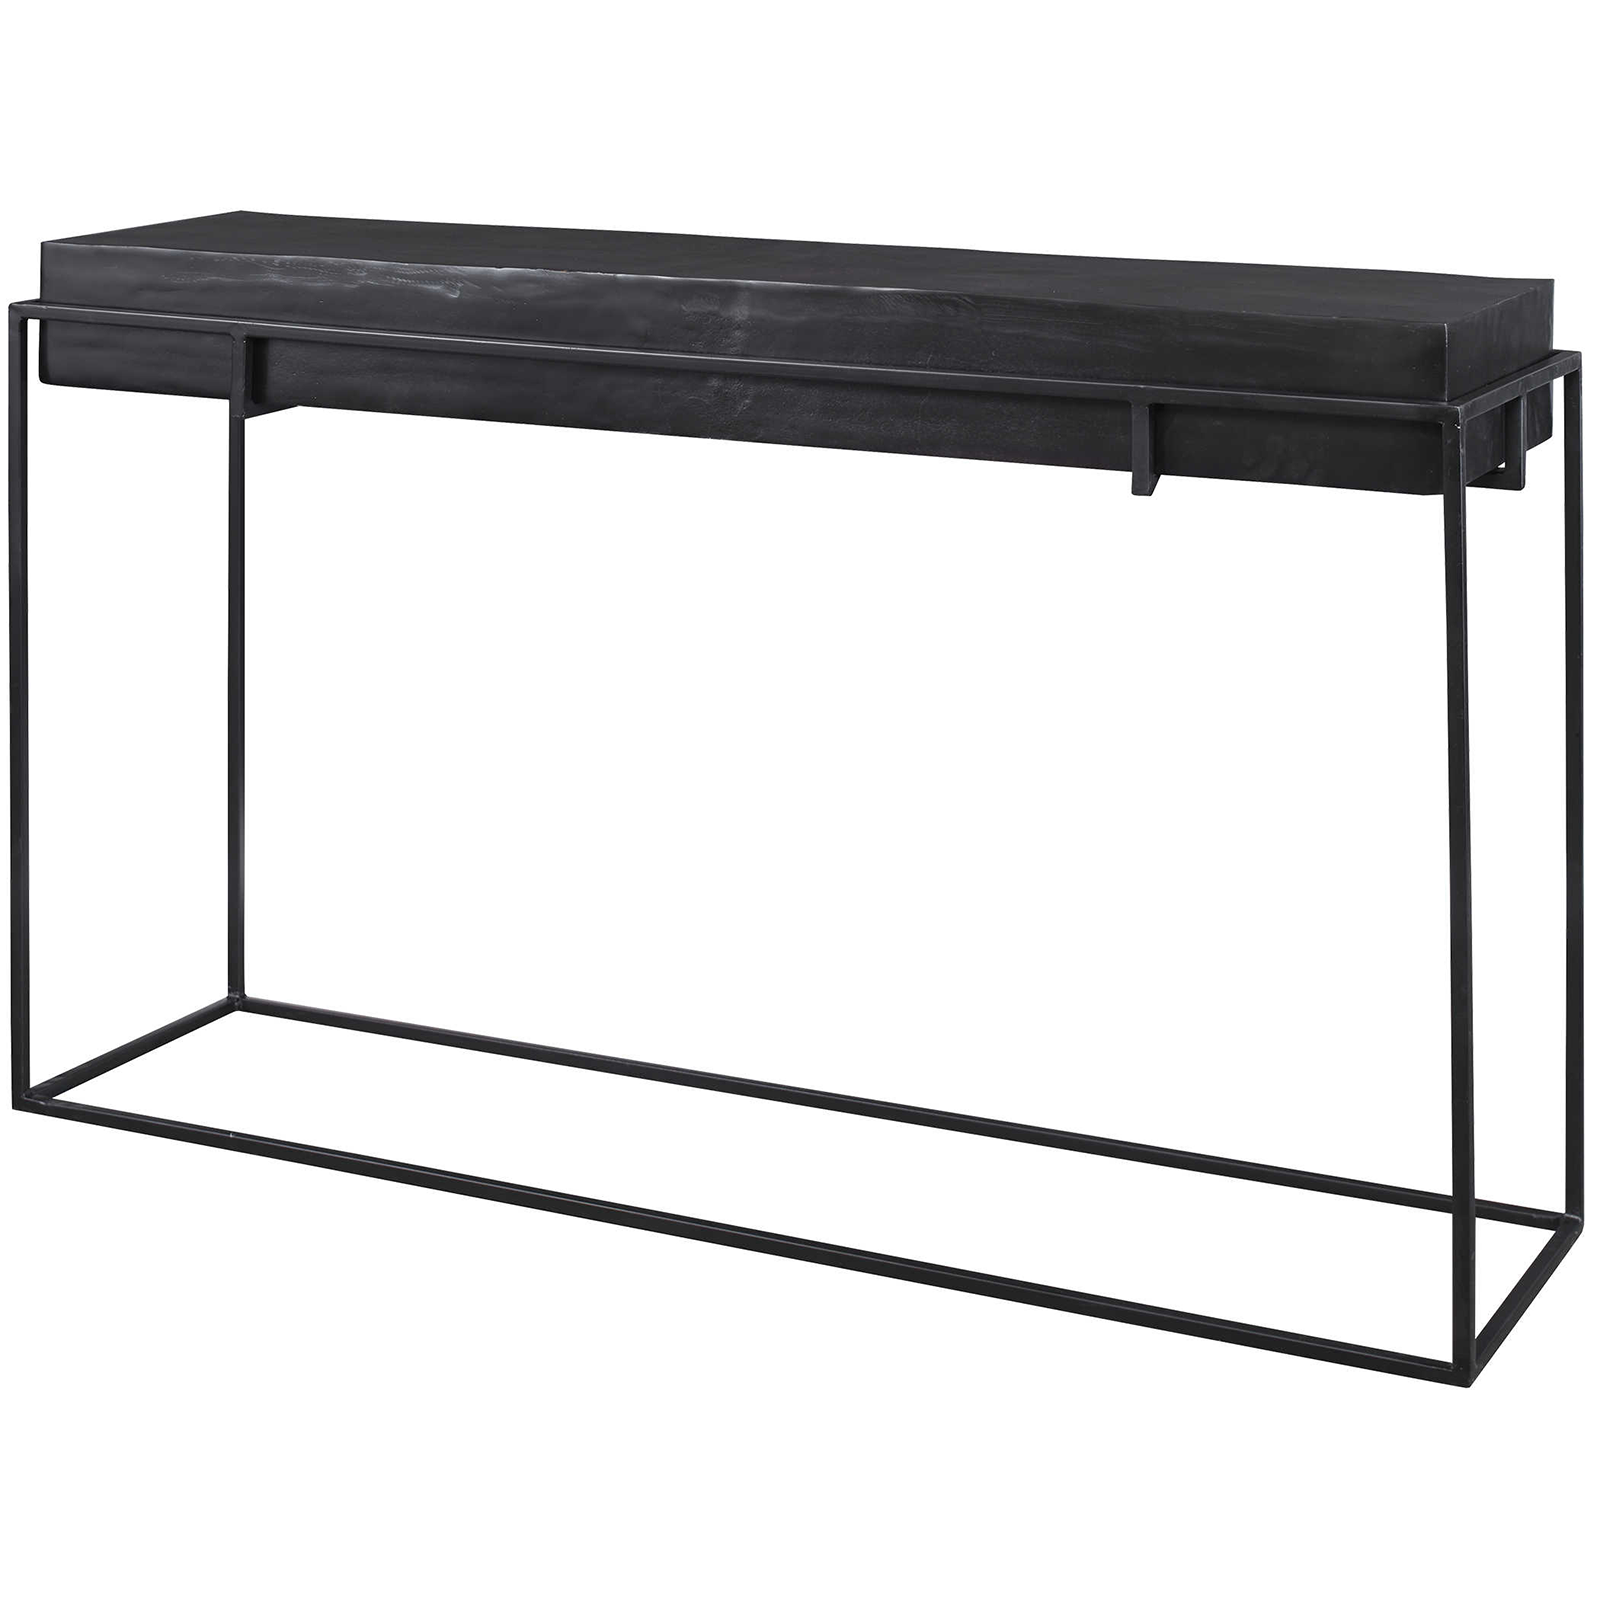 Karly 55" Console Table